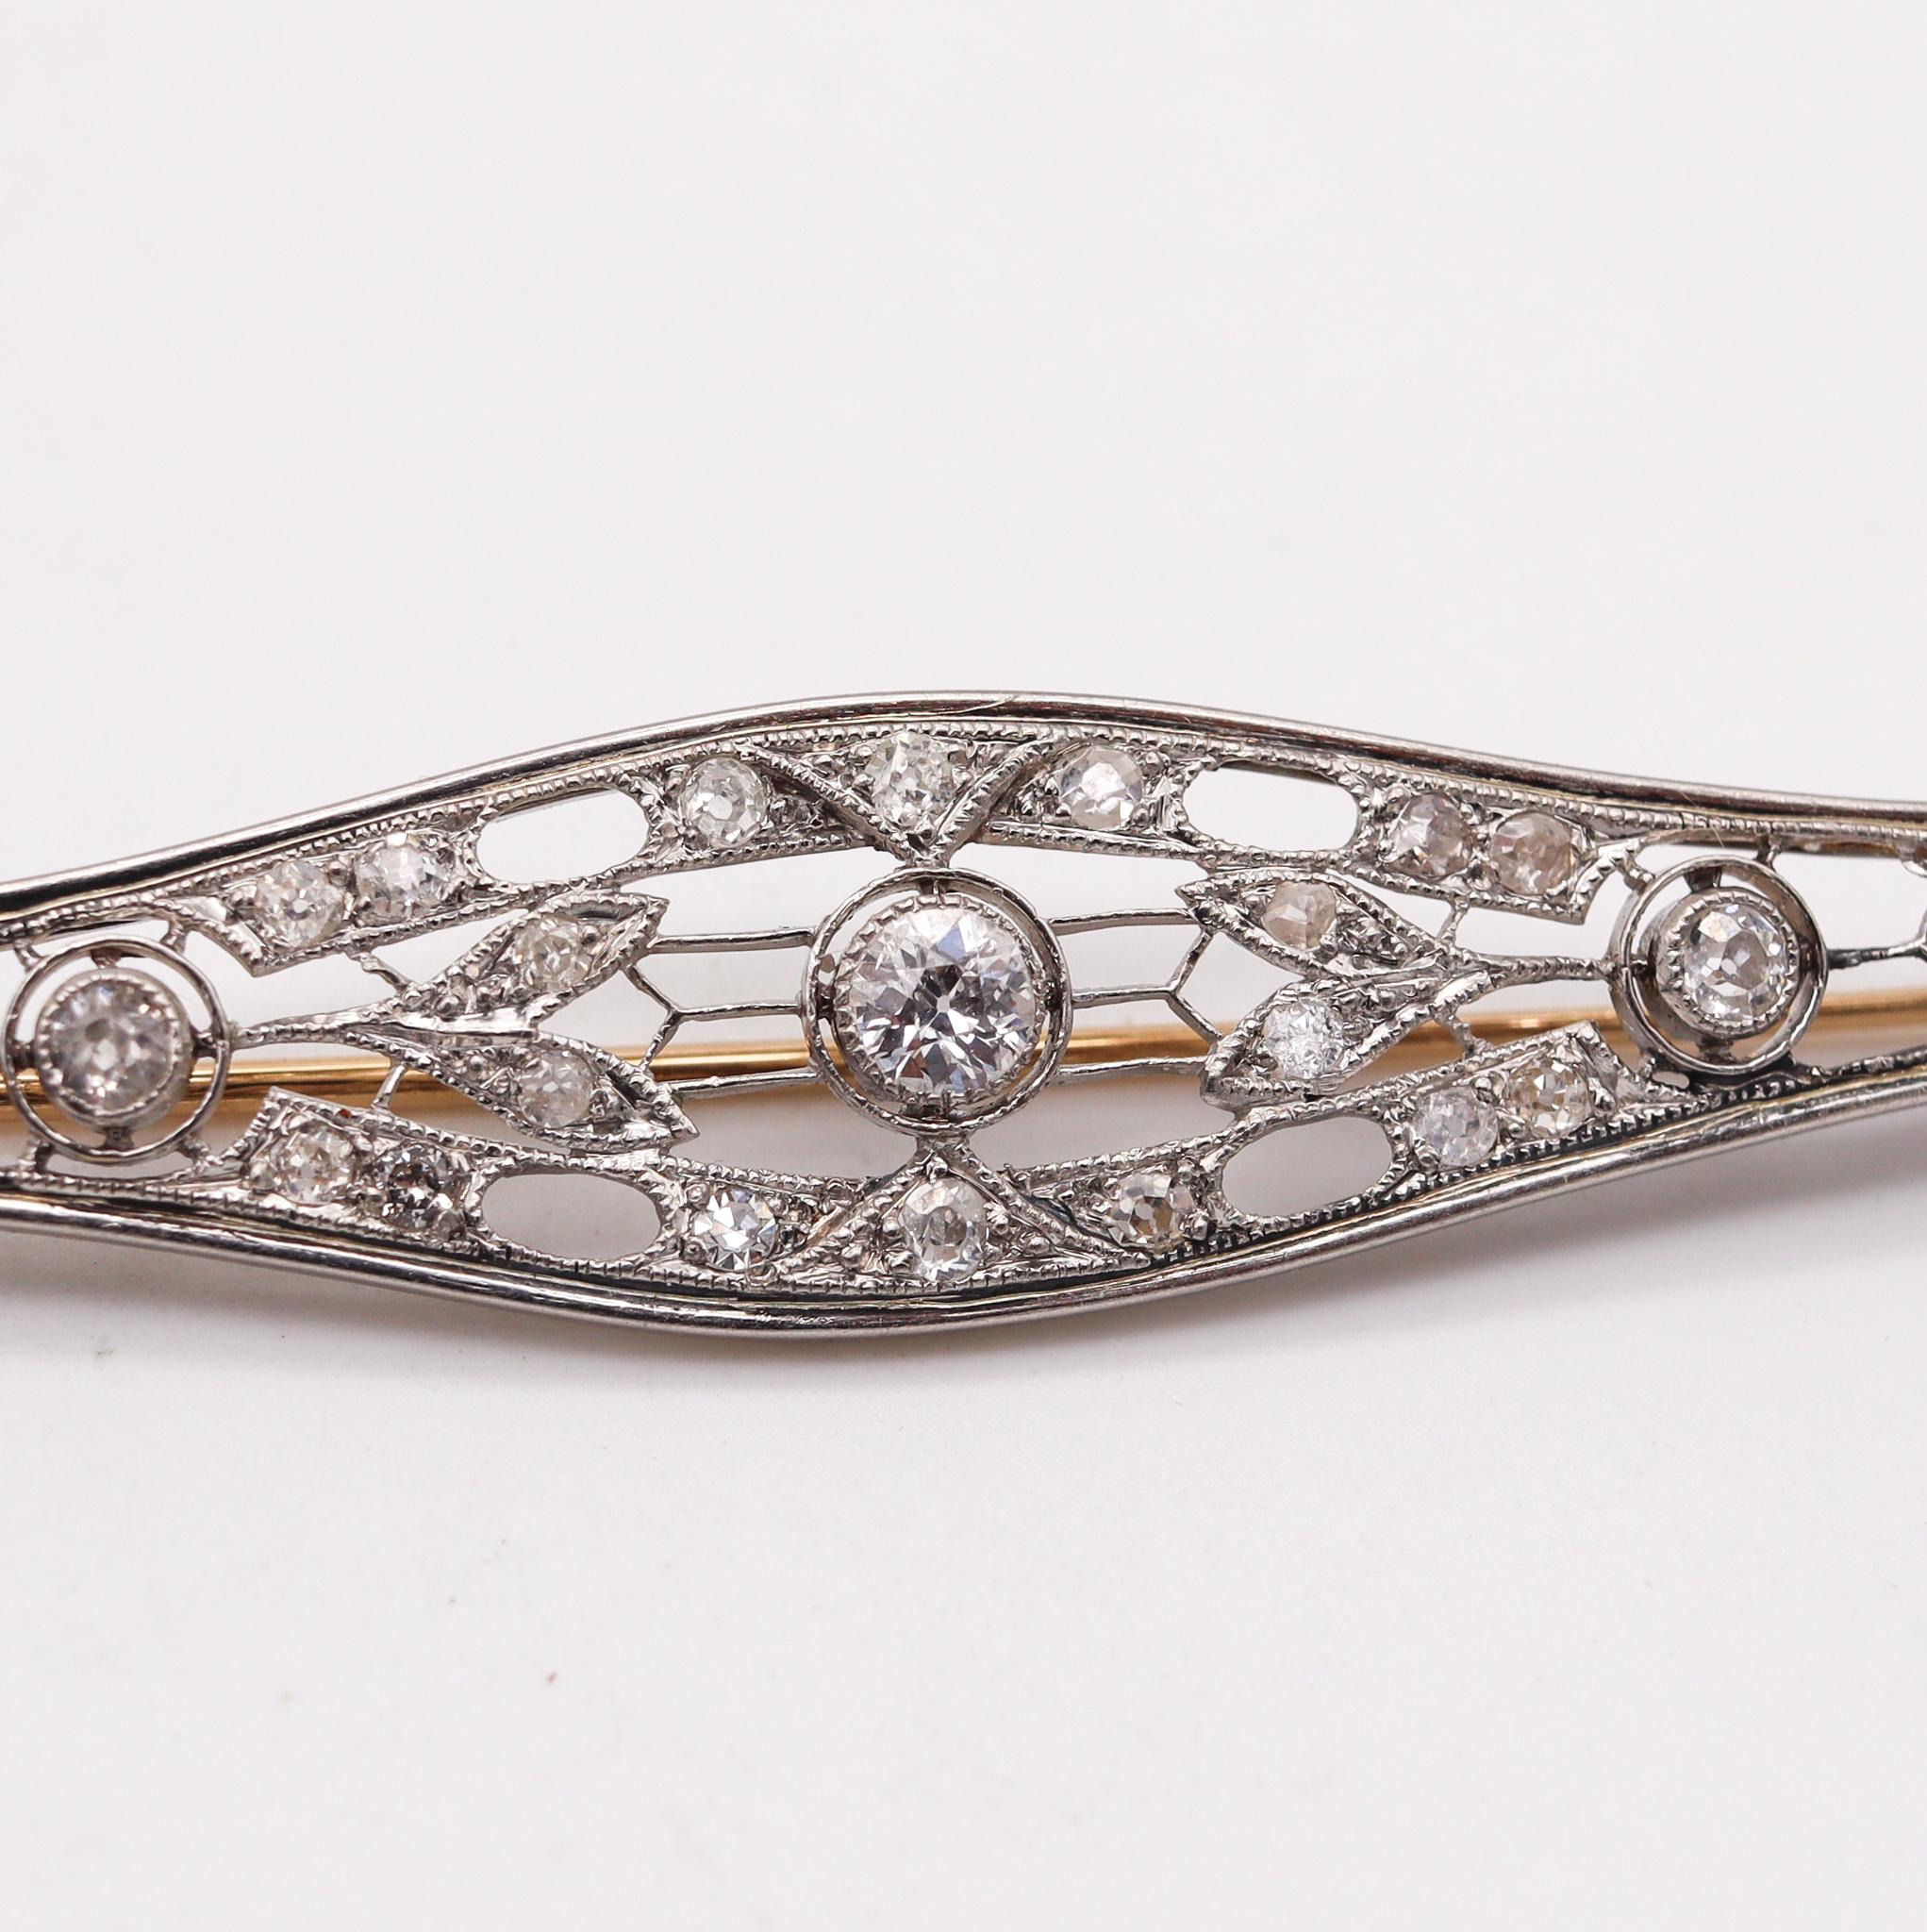 Art Deco 1930 Elongated Classic Brooch In Platinum With 2.38 Ctw In Diamonds For Sale 1